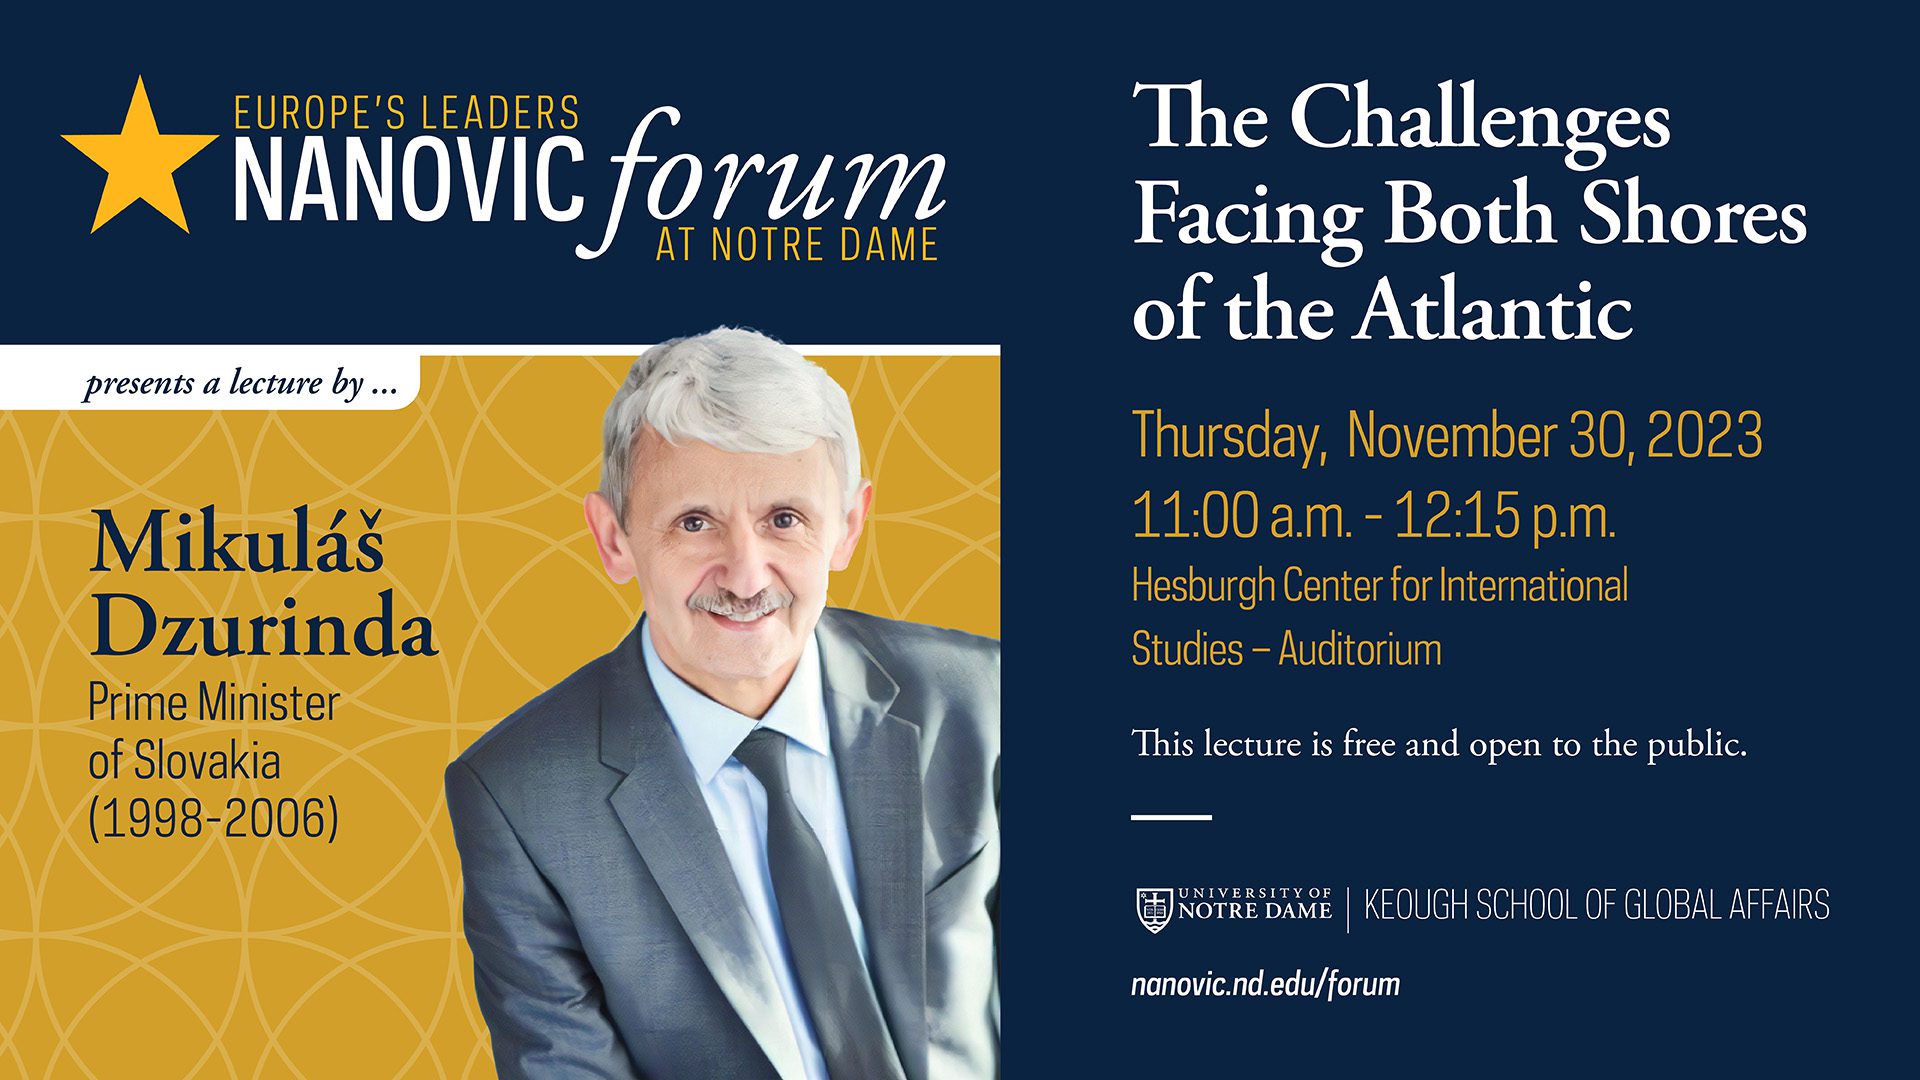 The Challenges Facing Both Shores of the Atlantic with Mikuláš Dzurinda